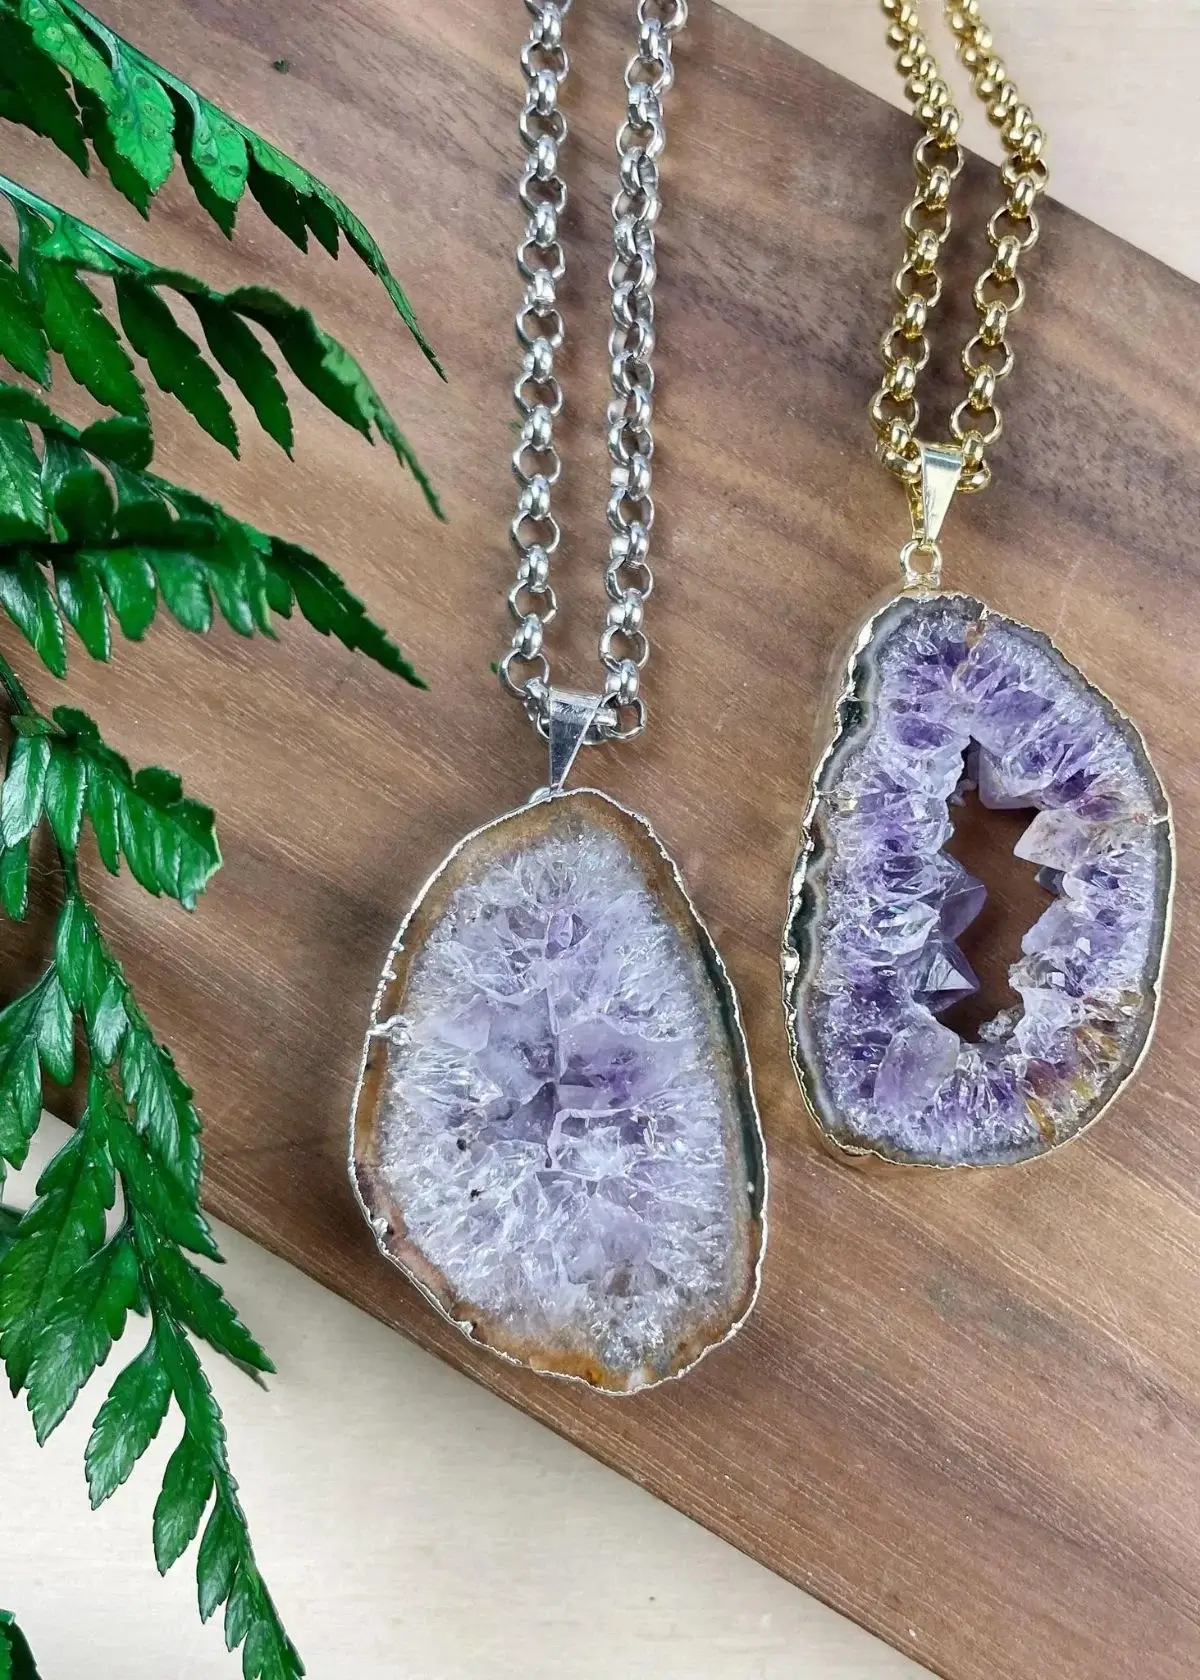 How to choose the right geode necklace?